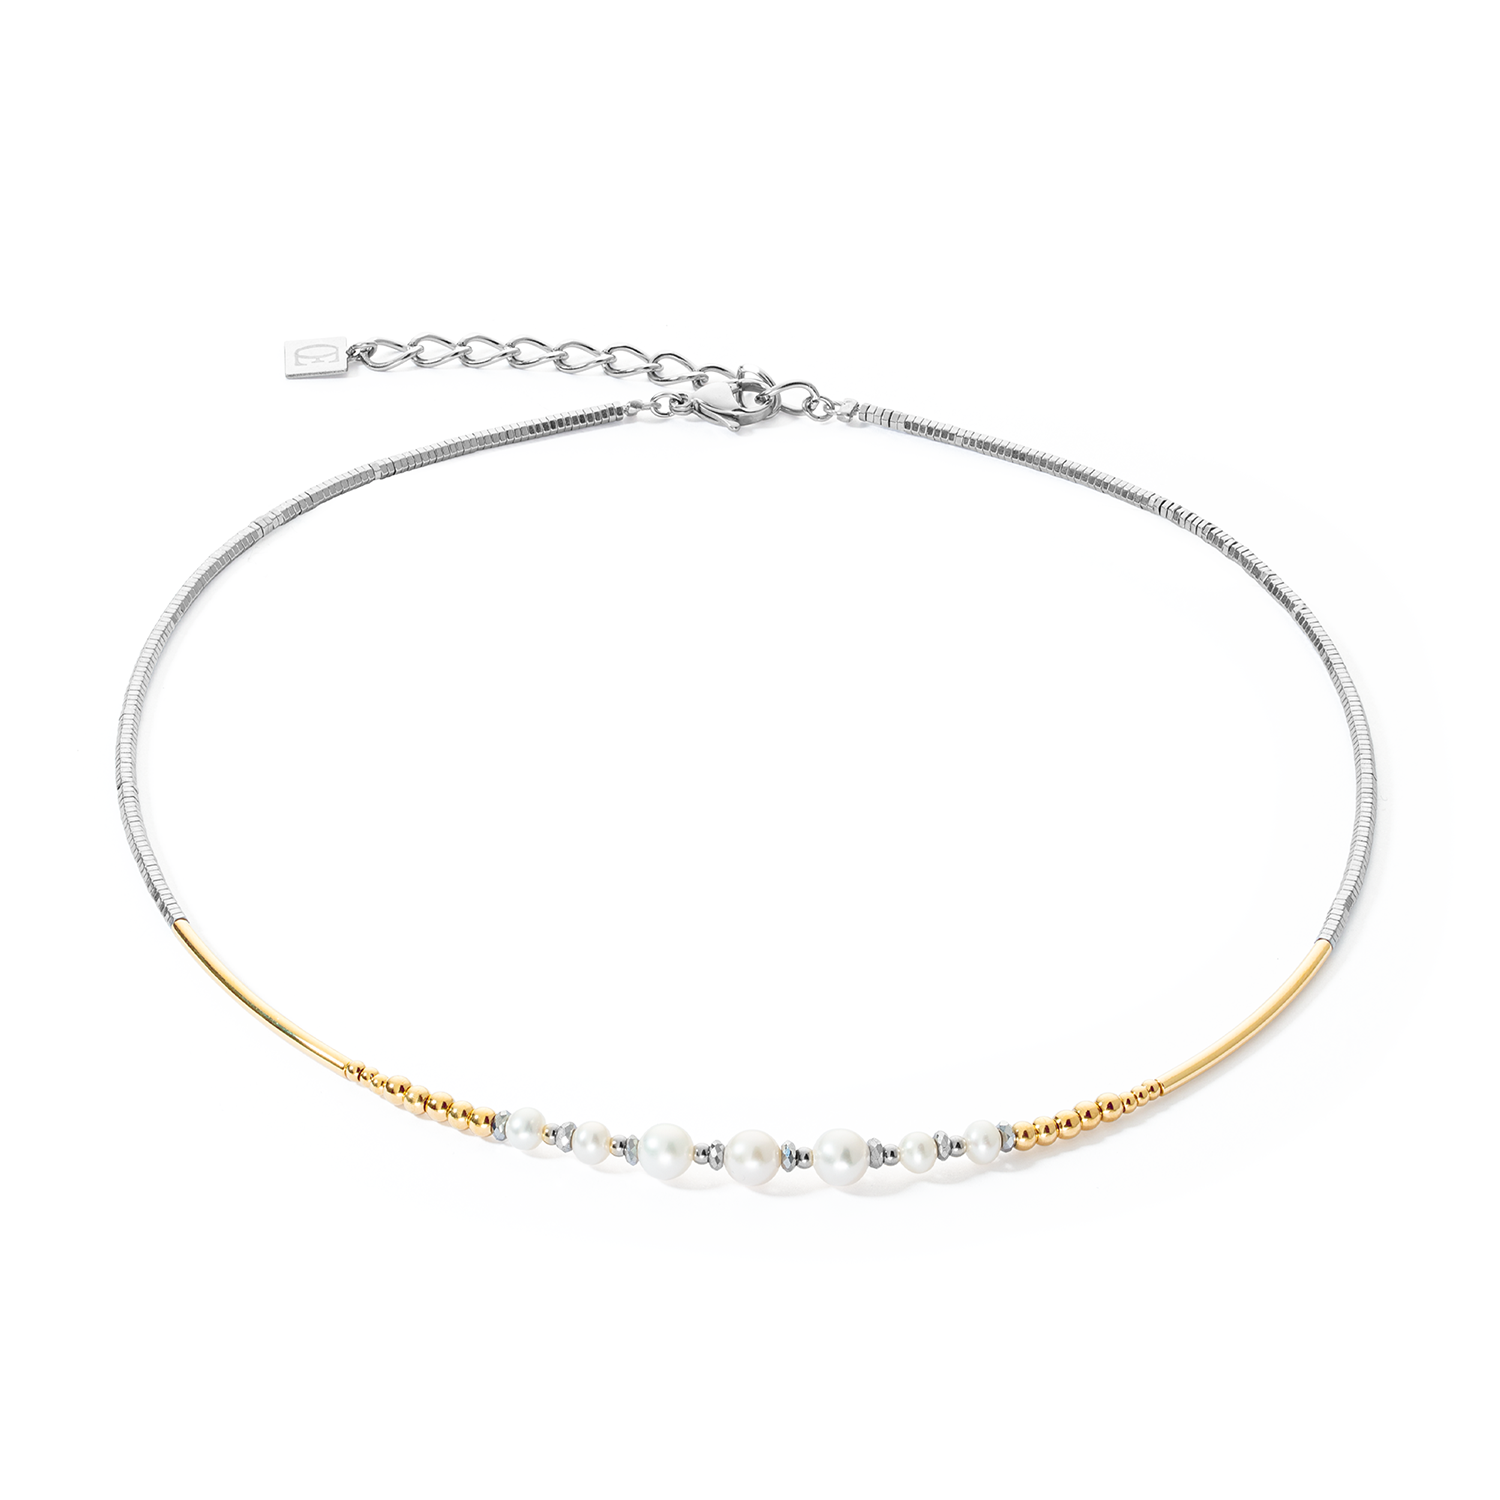 Freshwater Pearls, Stainless Steel Gold Necklace 1117/10_1426